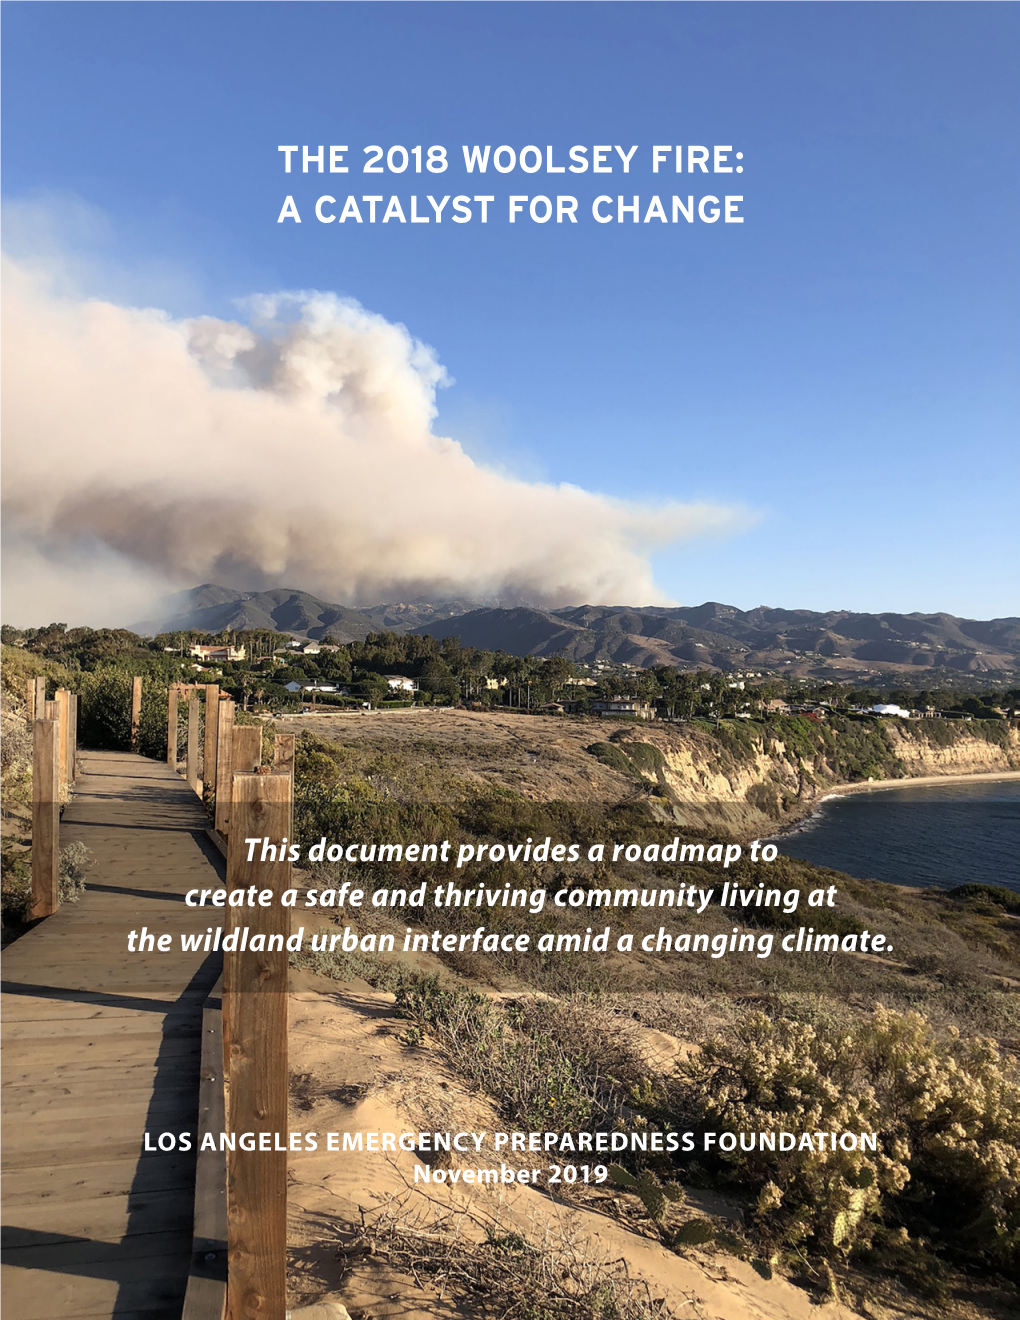 The 2018 Woolsey Fire: a Catalyst for Change